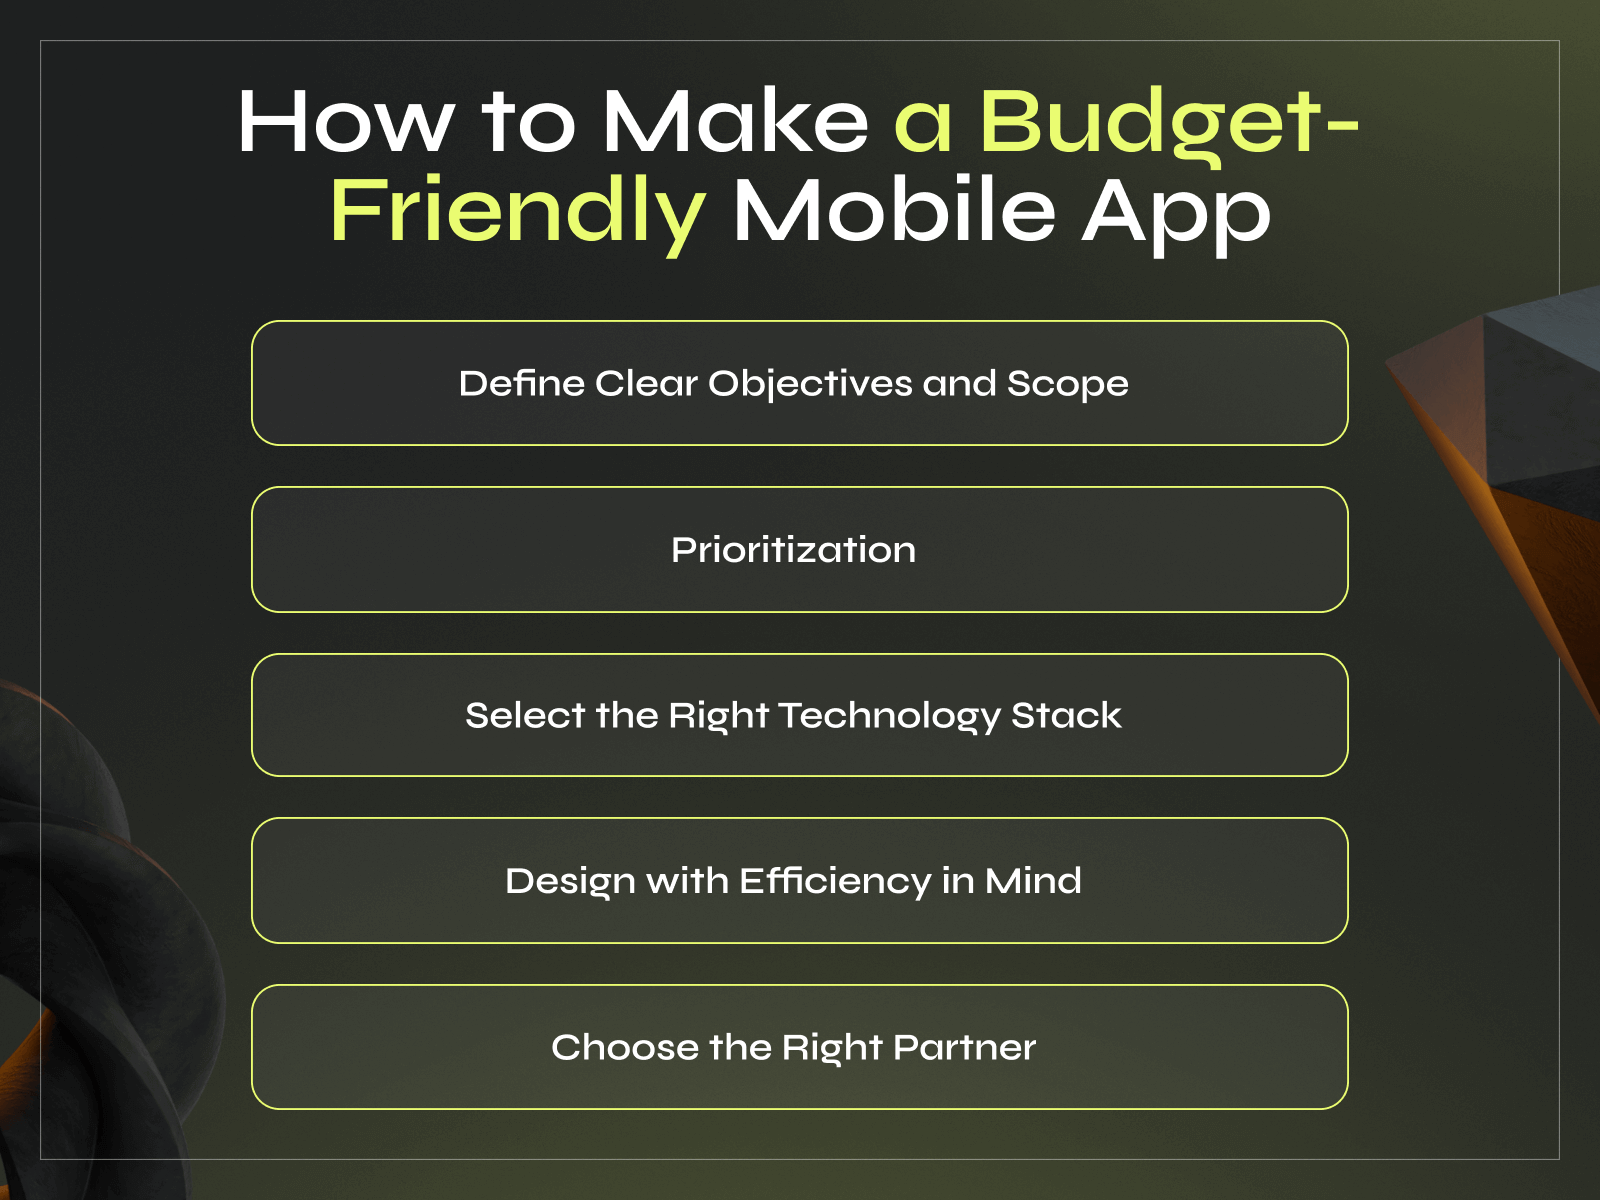 How to Make a Budget-Friendly Mobile App - Photo 1